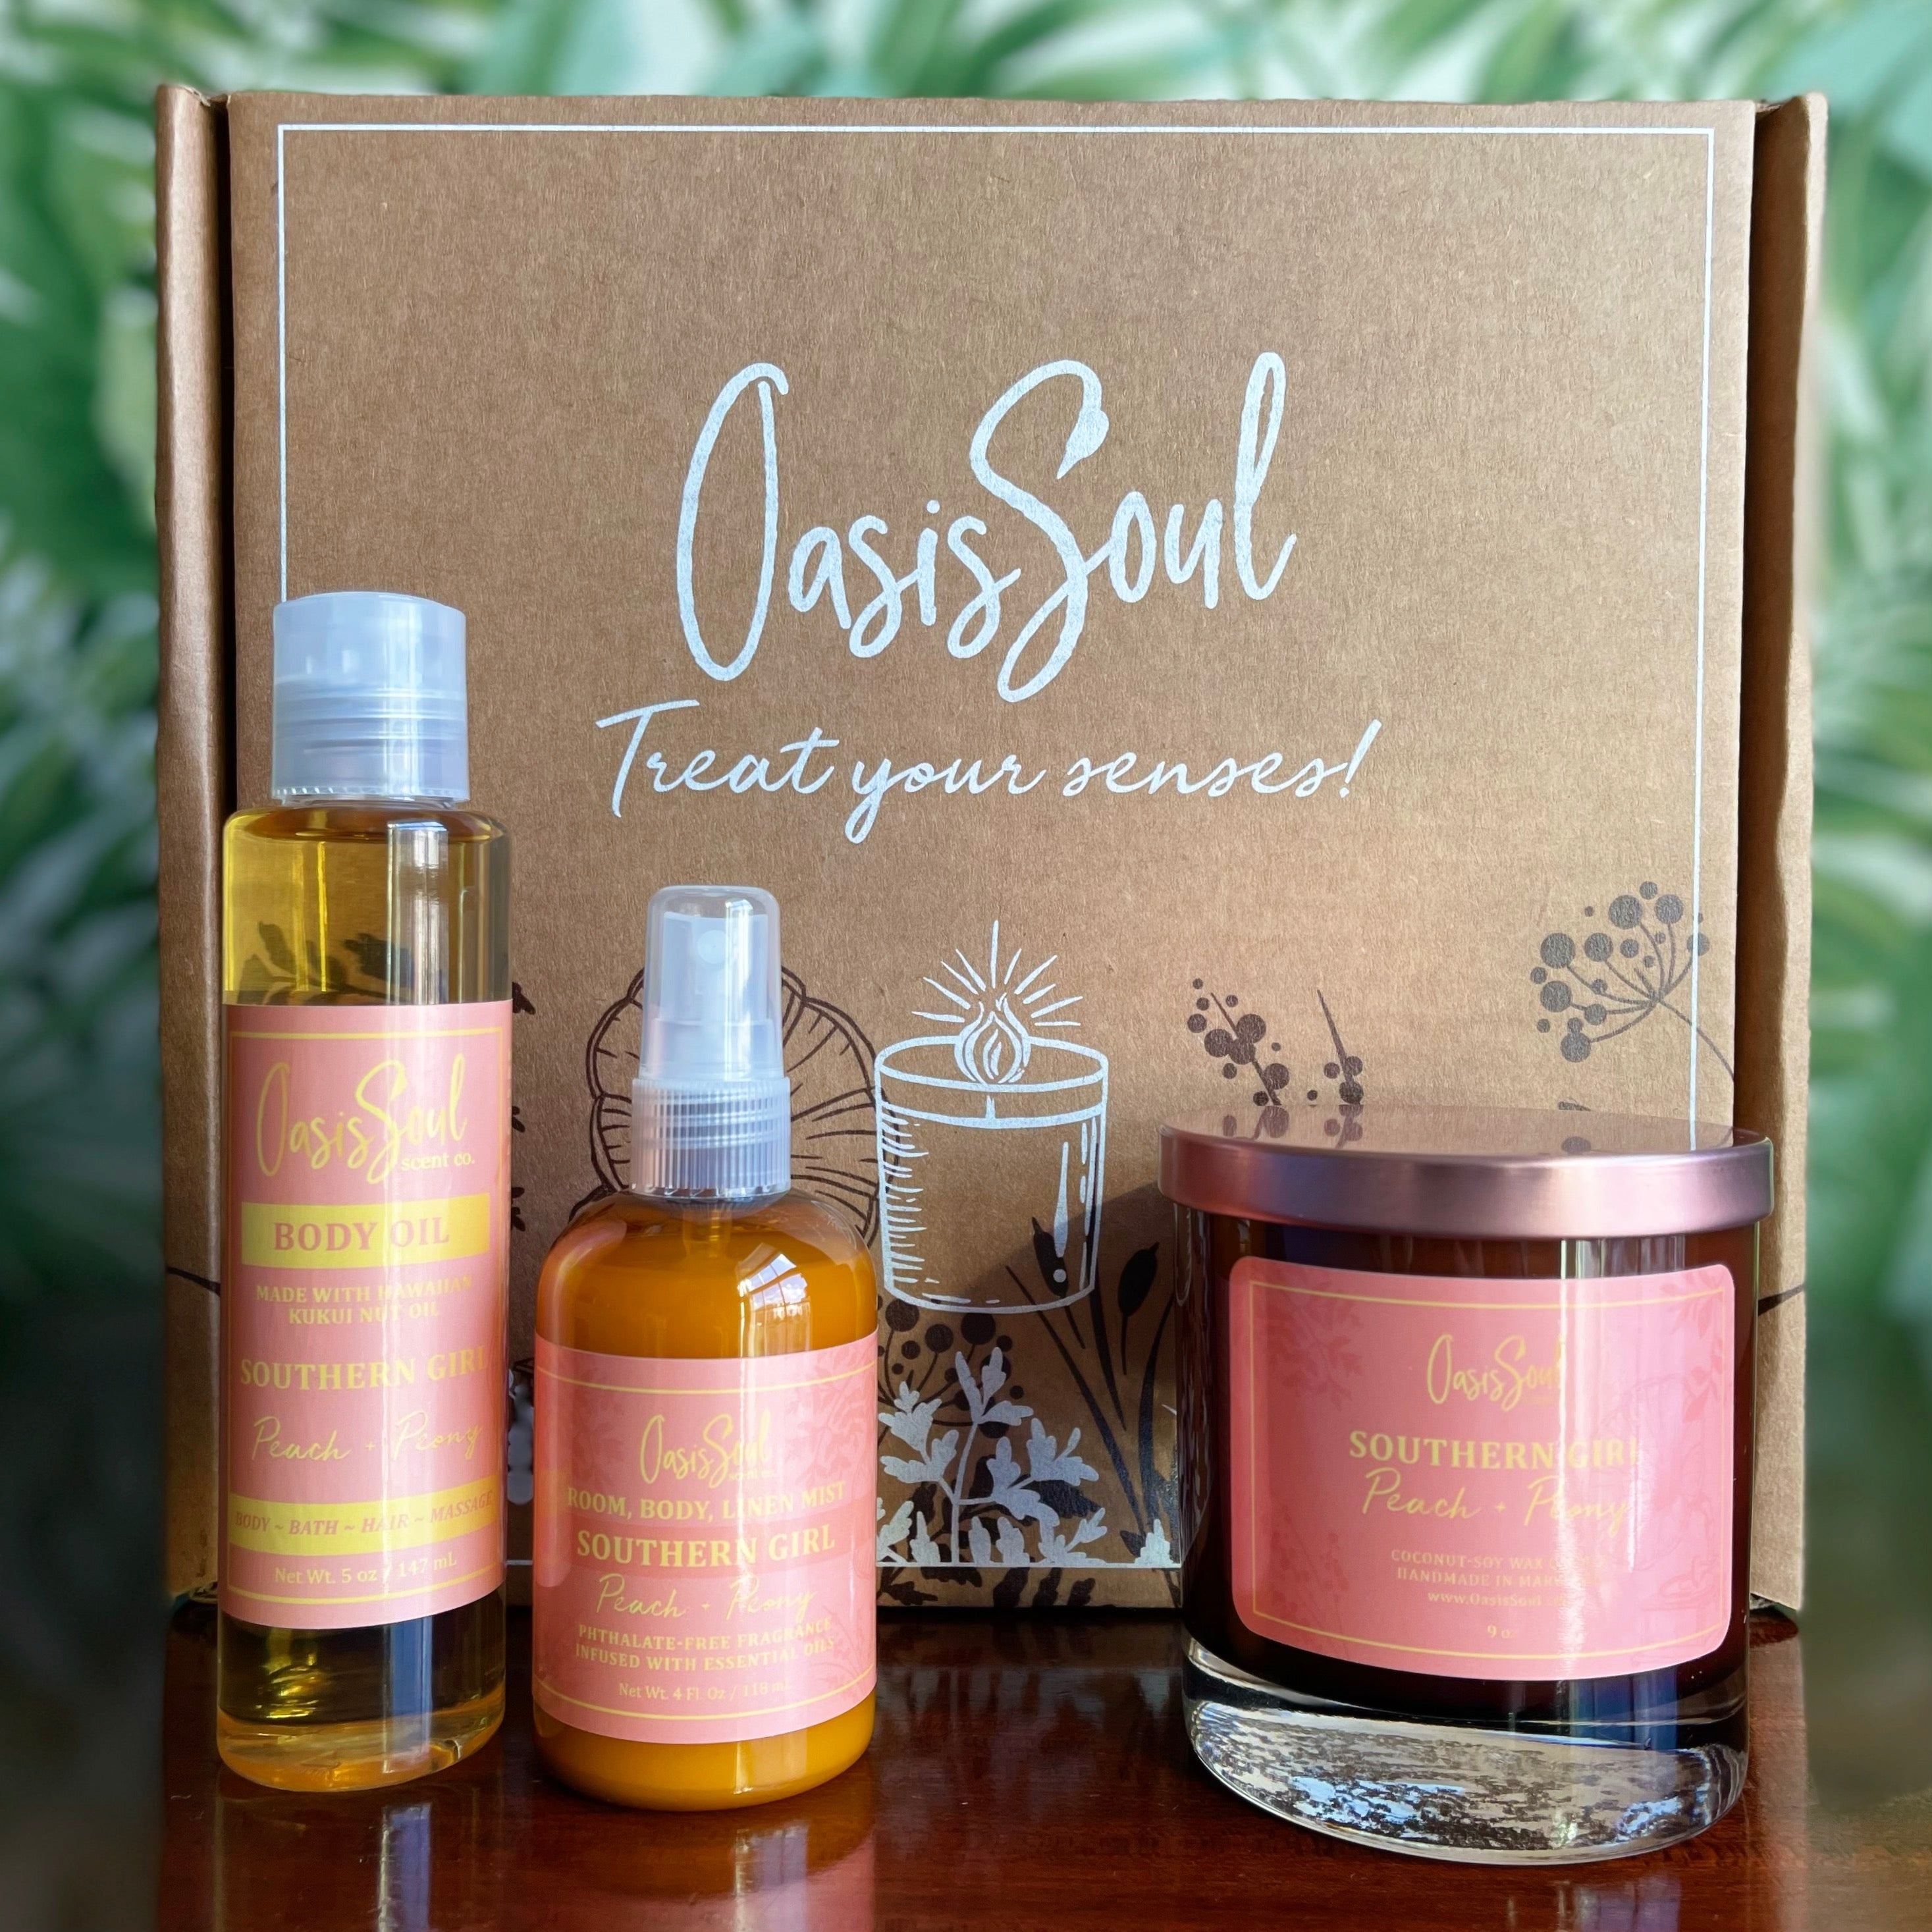 SOUTHERN GIRL Luxe Treat Box